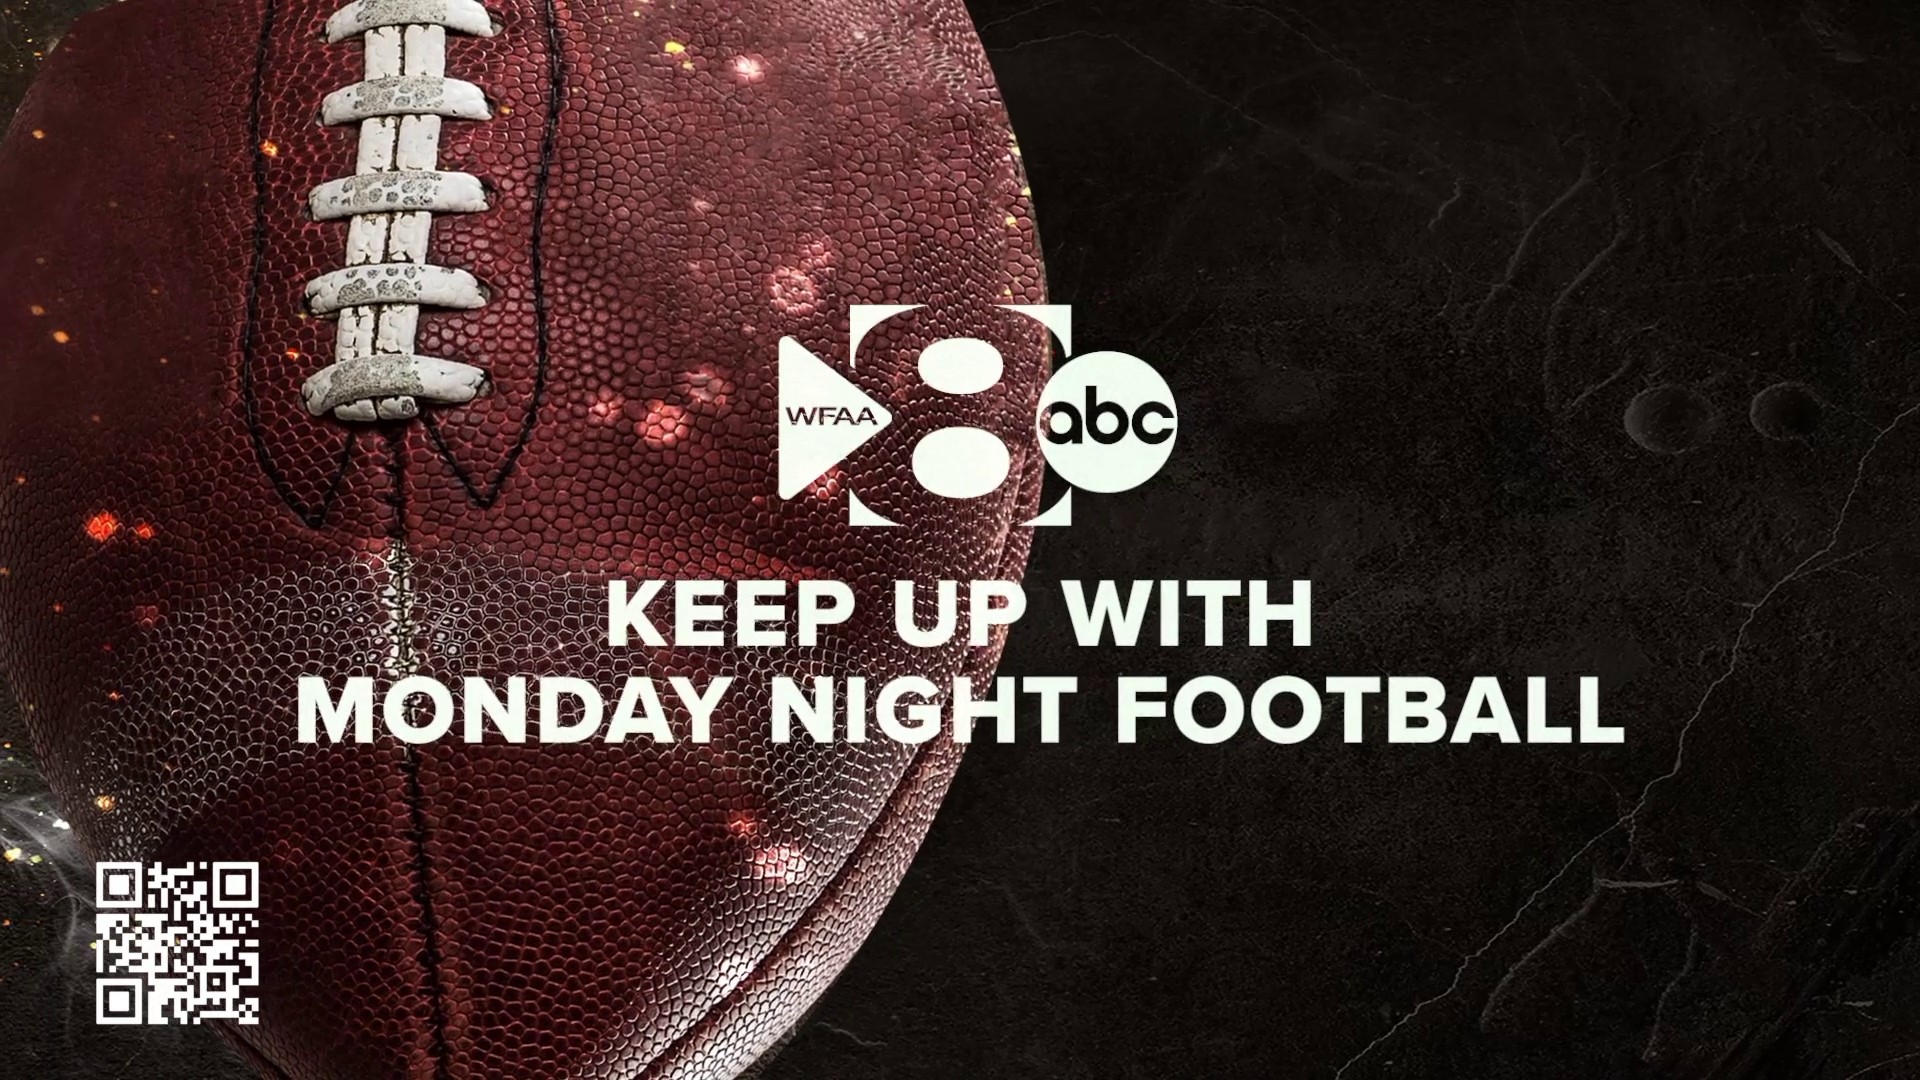 How to watch MNF in Dallas, Rescanning for clear signal